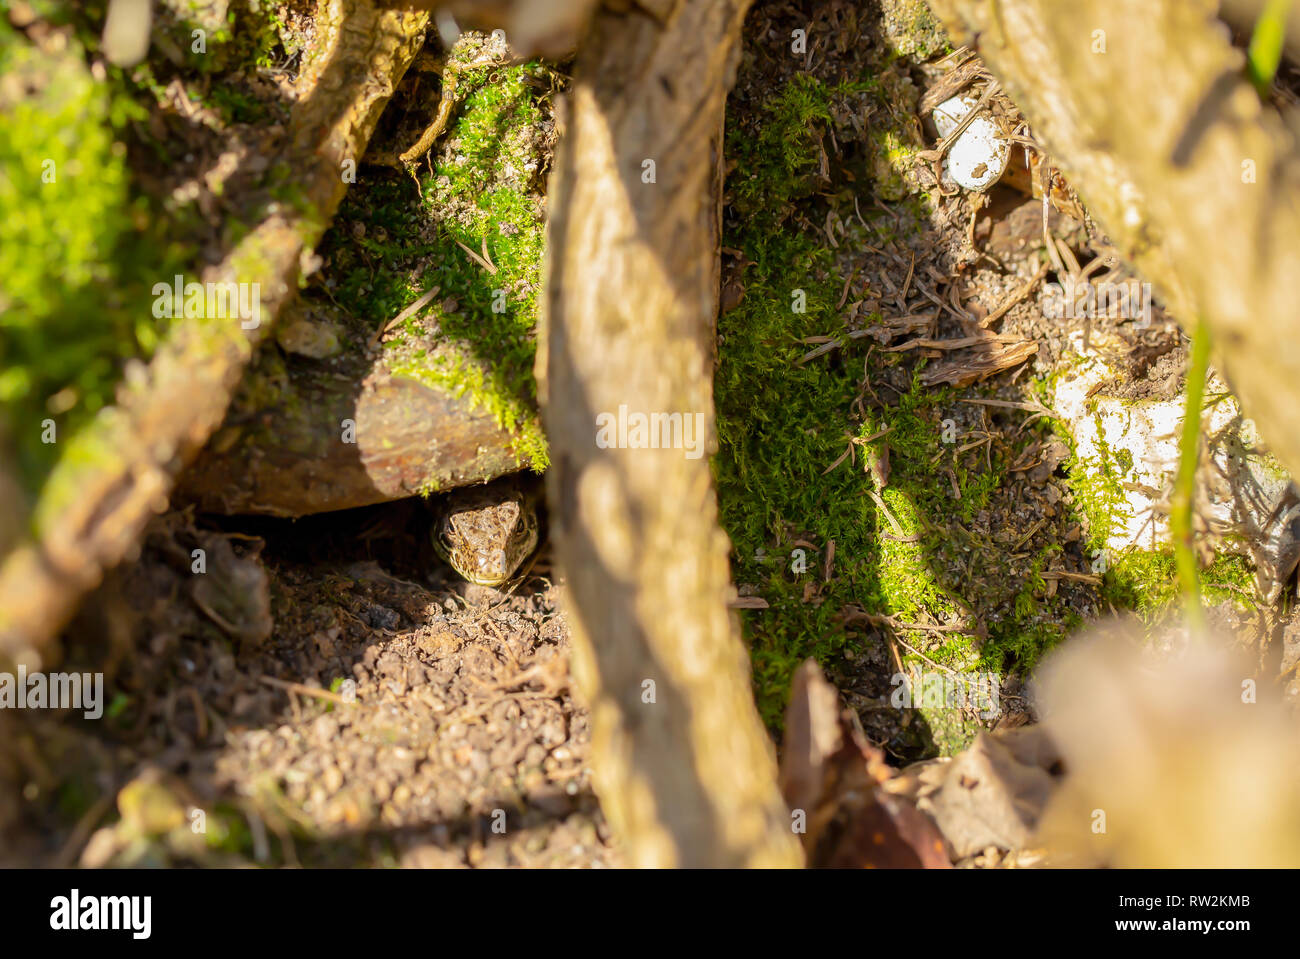 Colour wildlife portrait of a cautious Sand lizard (Lacerta agilis) peeking out of a crevice to check the coast is clear. Taken near Sandbanks, Poole, Stock Photo